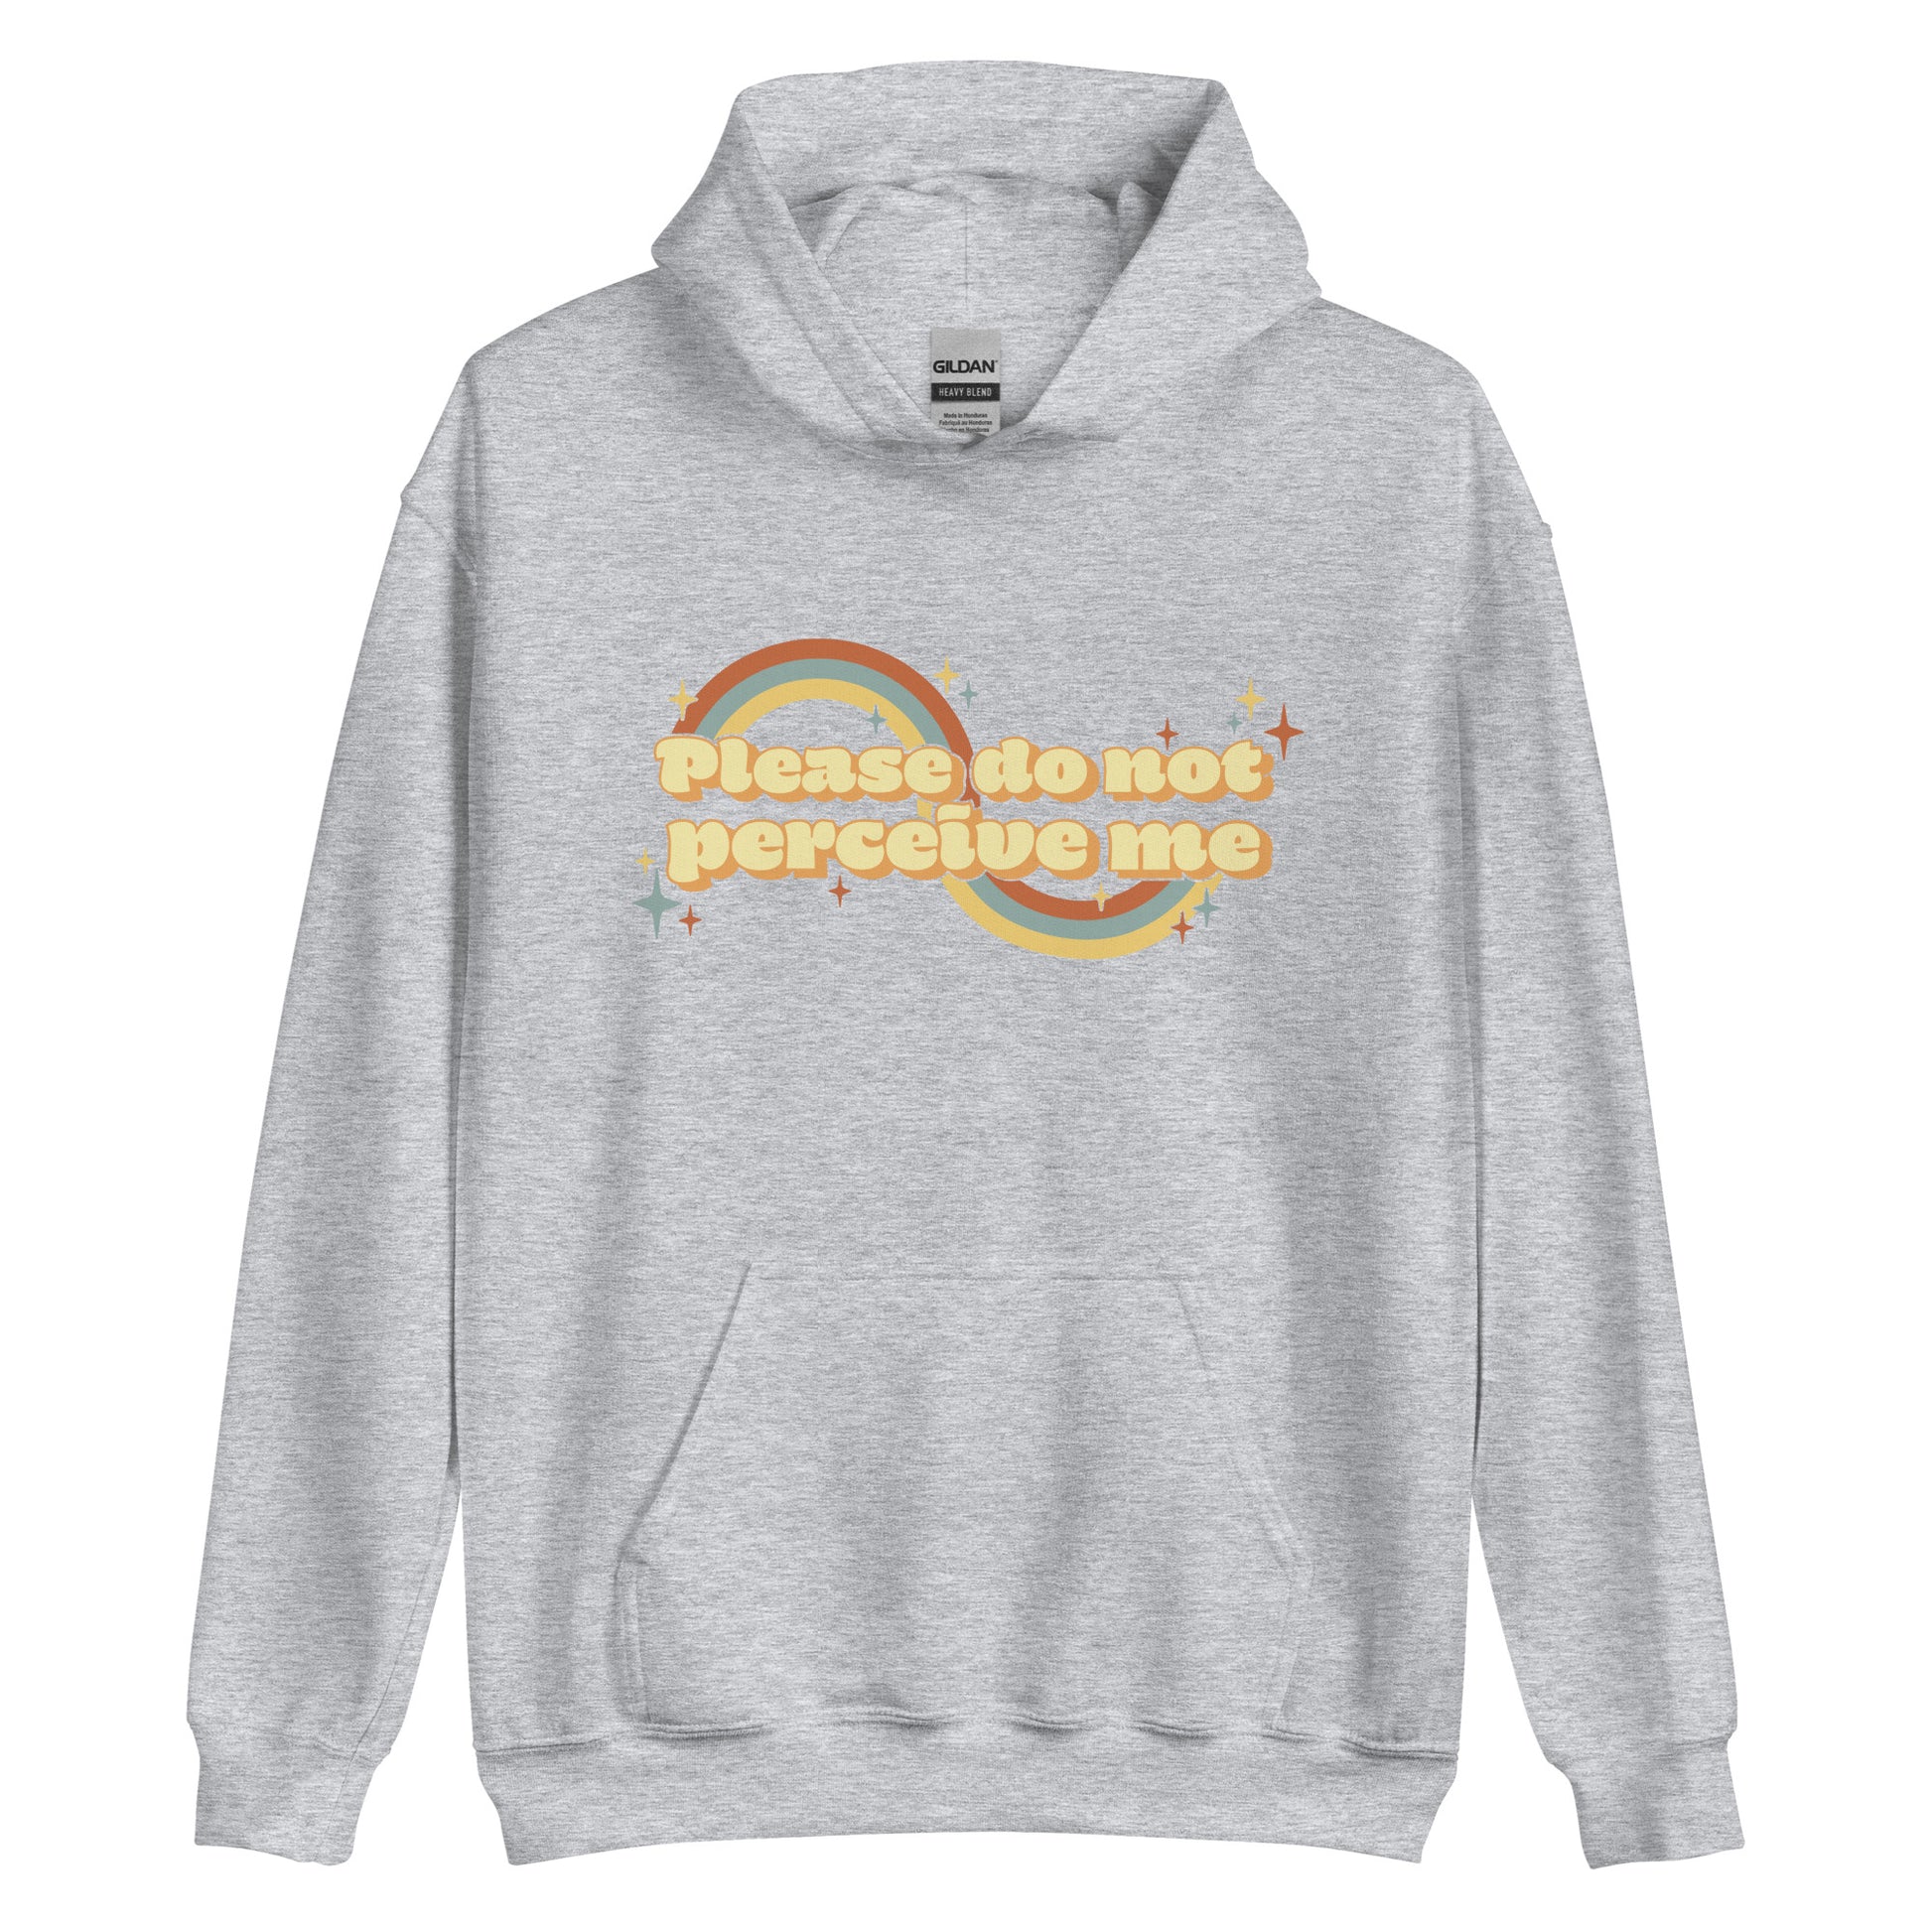 A light heather grey hooded sweatshirt featuring vintage-style text that reads "Please do not perceive me". A colorful swirl and sparkles surrounds the text in red, yellow, and blue.